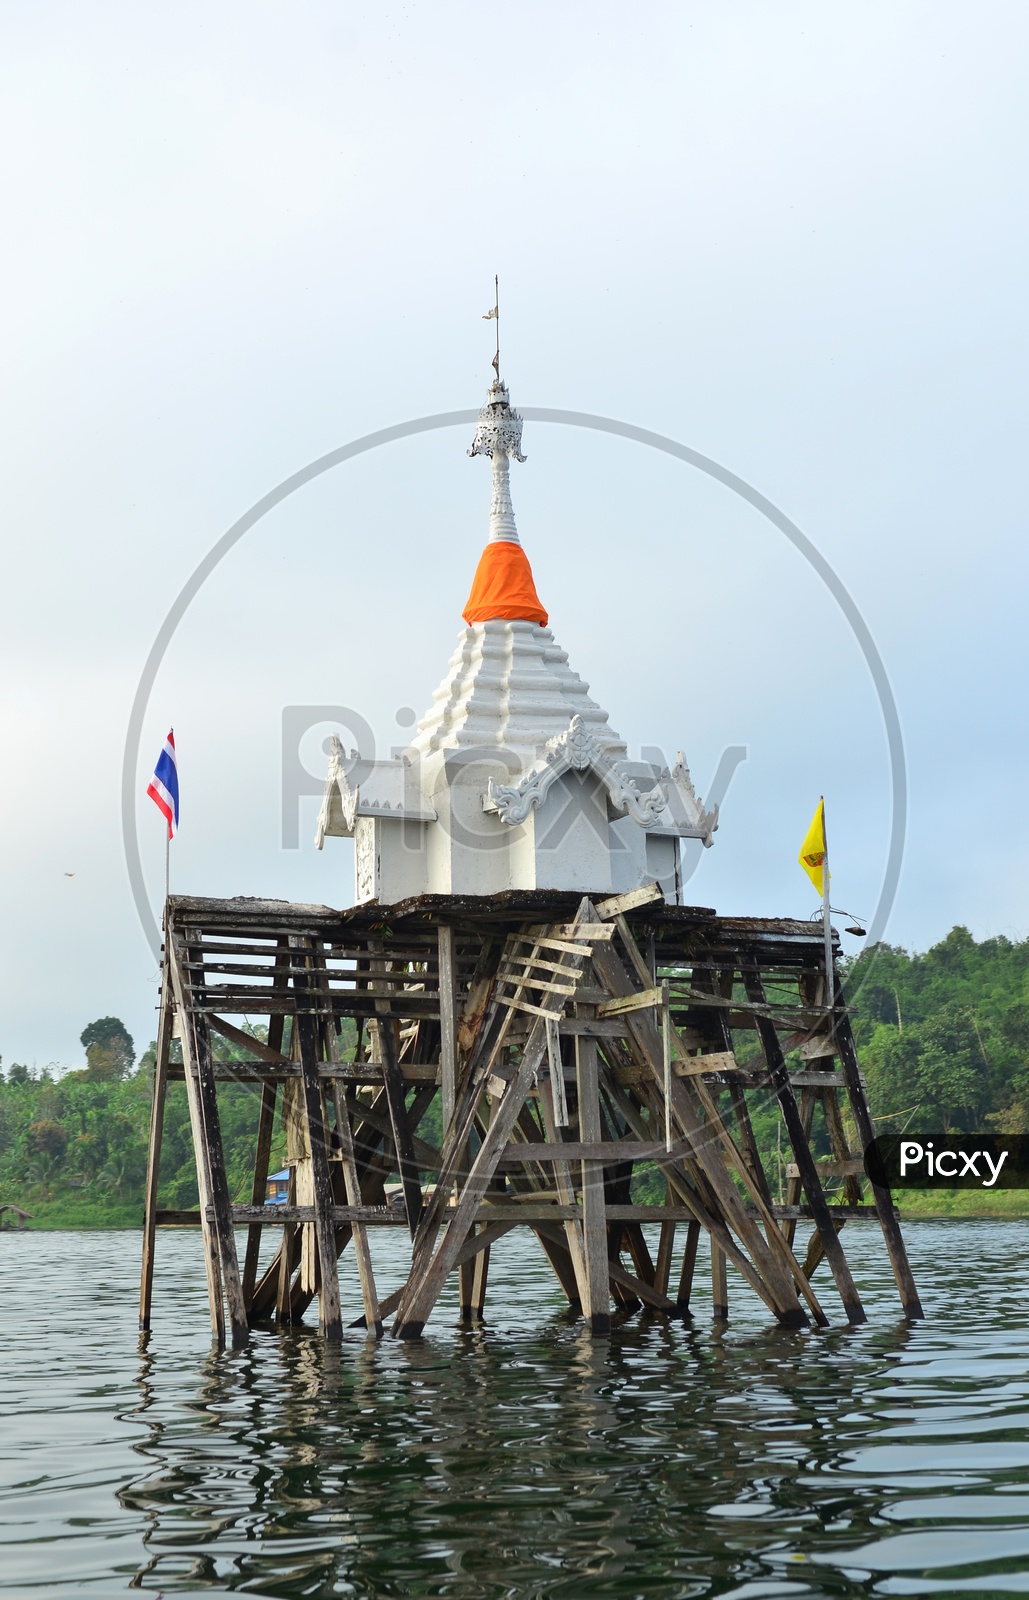 A Pagoda in the Thailand river